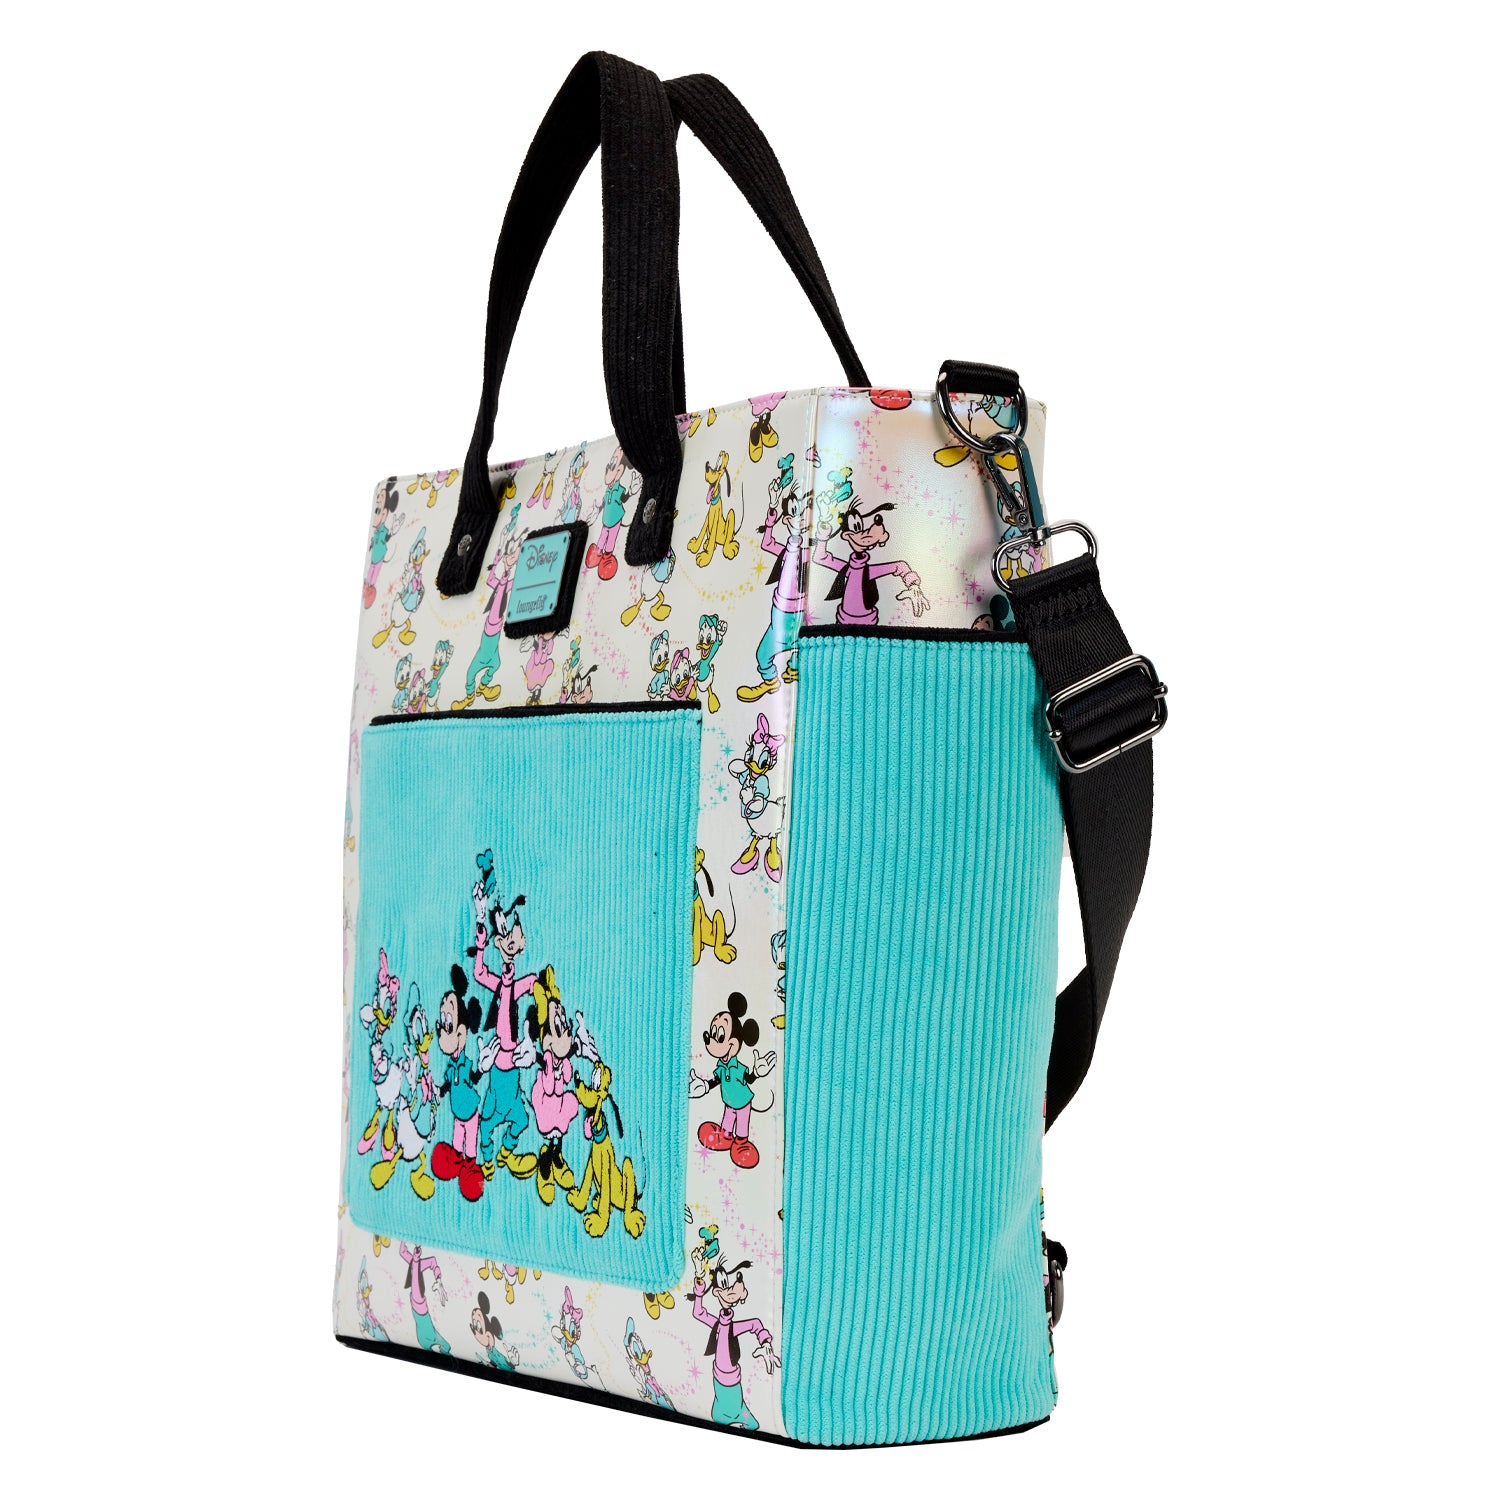 Mickey and Minnie Mouse - Love In Paris - Tote Bag - Purse